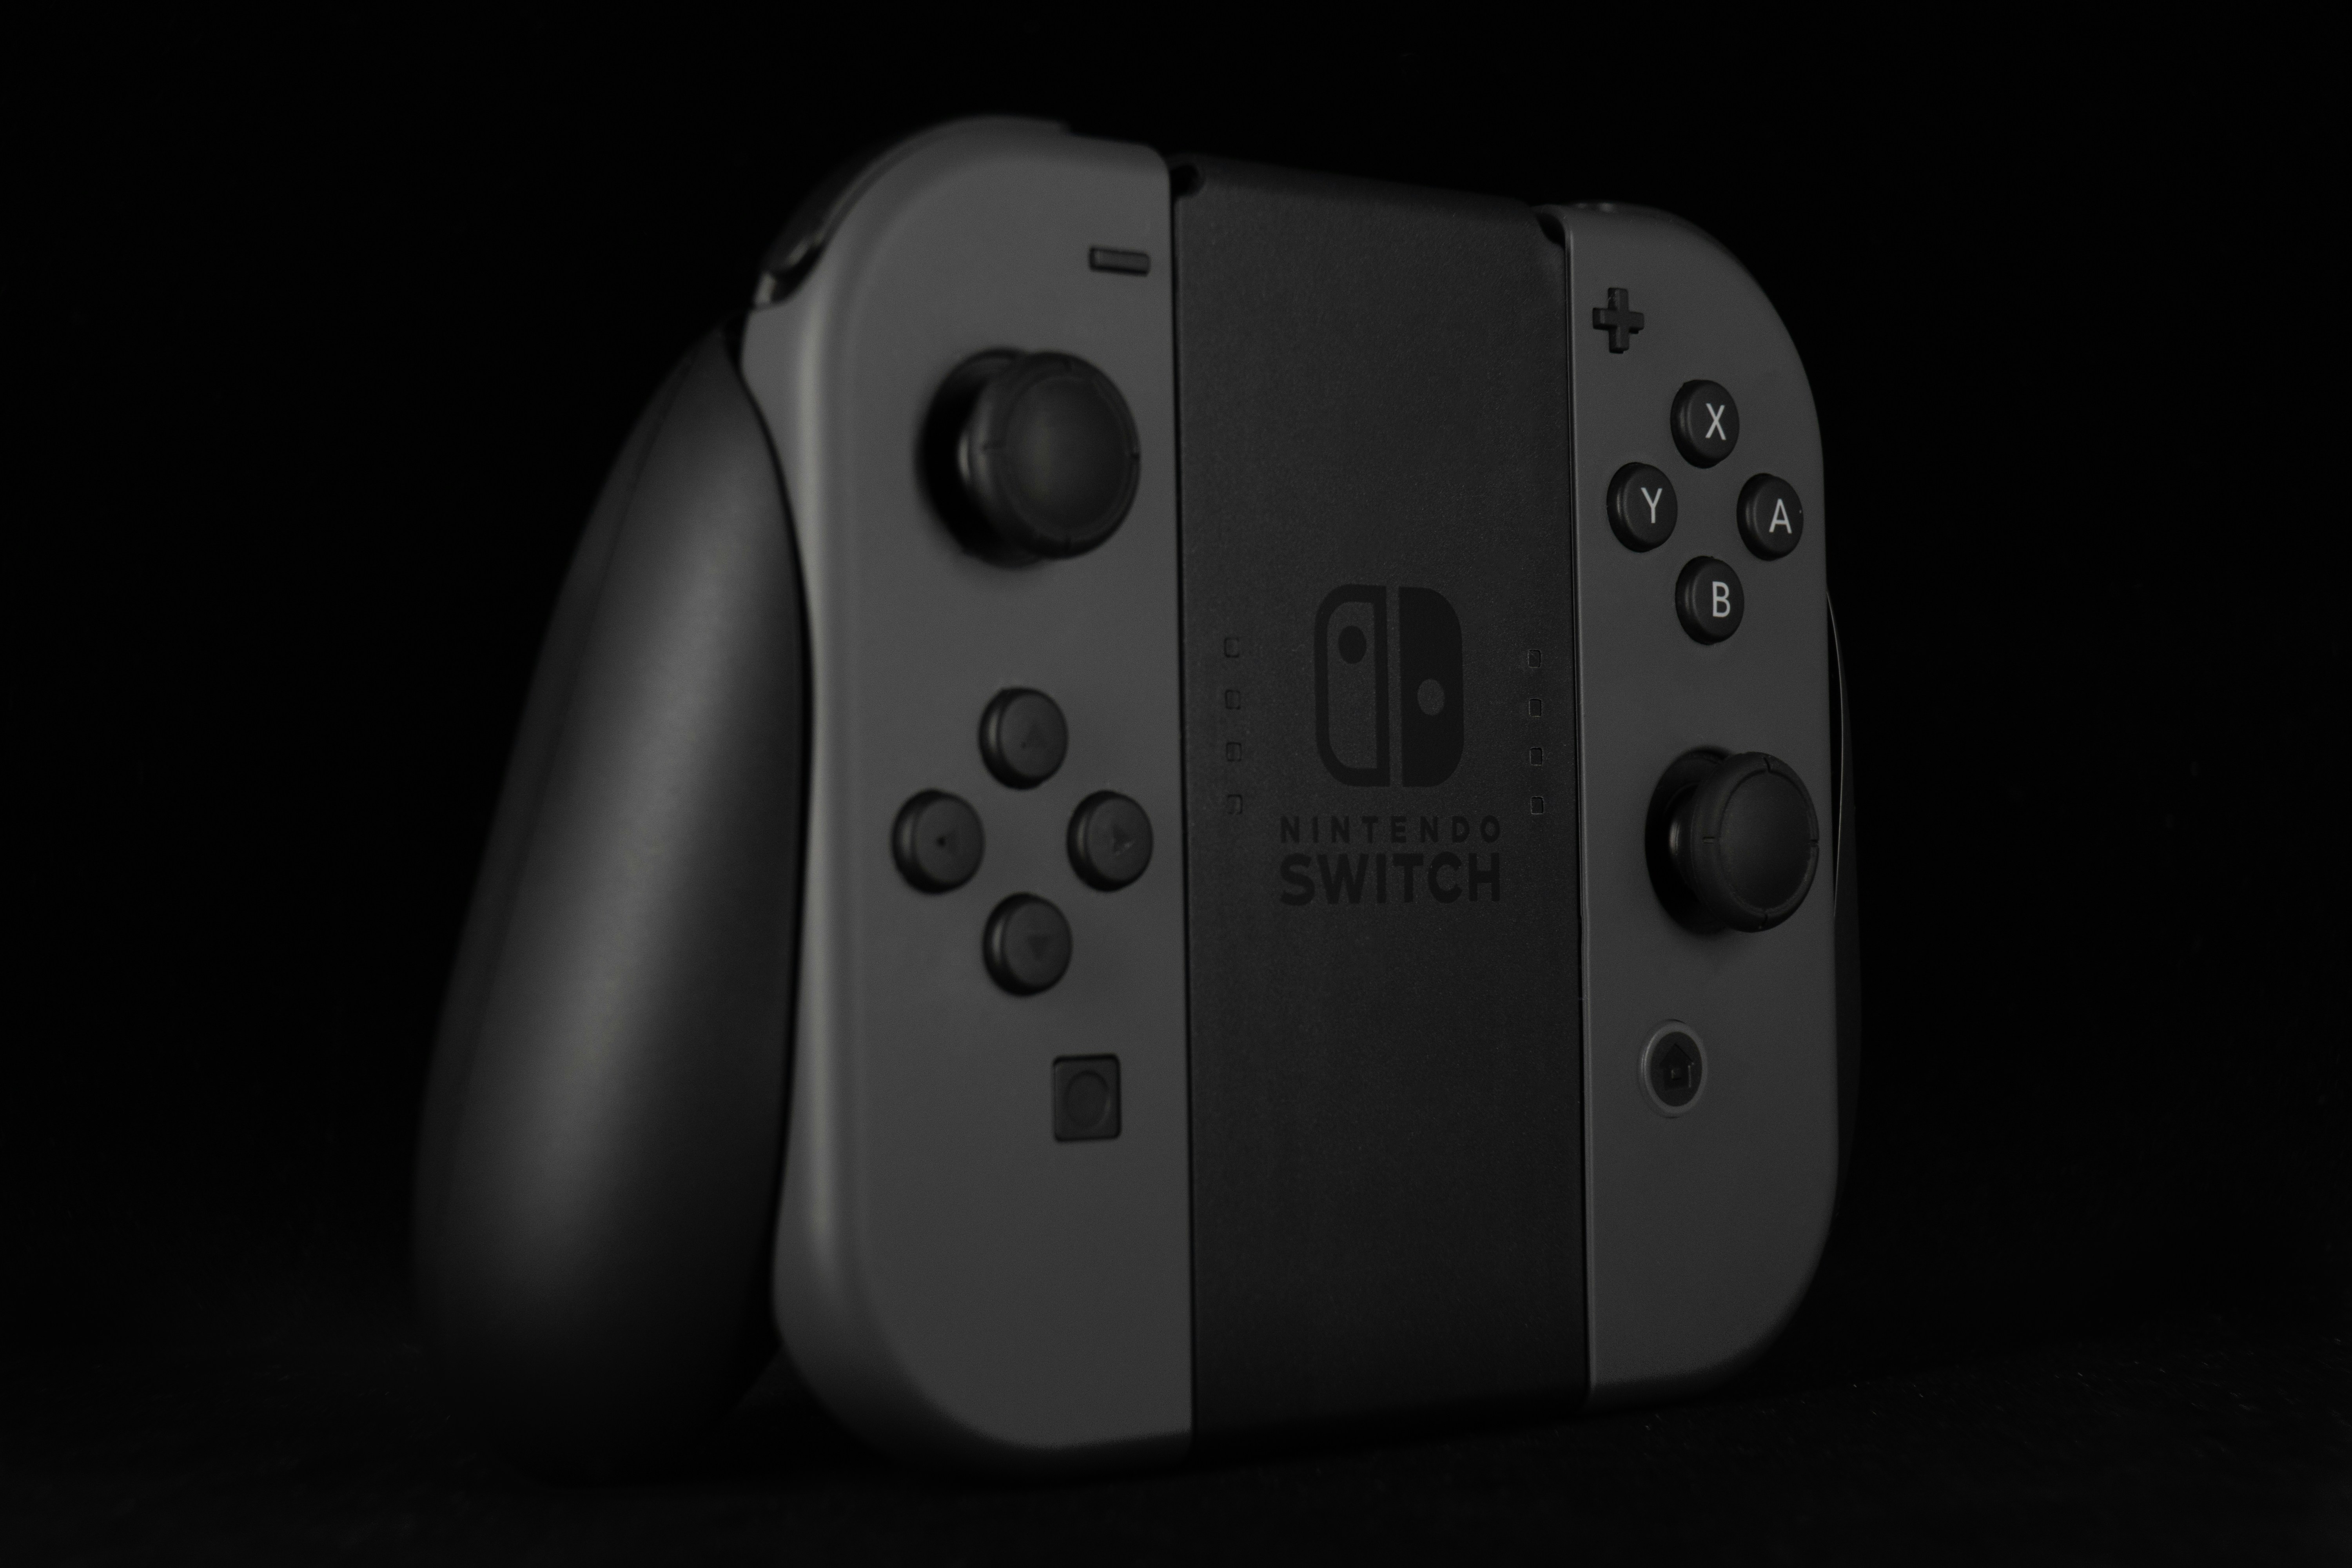 Nintendo Switch controller - - - Hey, if you like my photos and want to see more, follow me on Instagram: @myrtorp_philip -Contact me at - Philip@myrtorp.net -Paypal Support: paypal.me/pmyrtorp